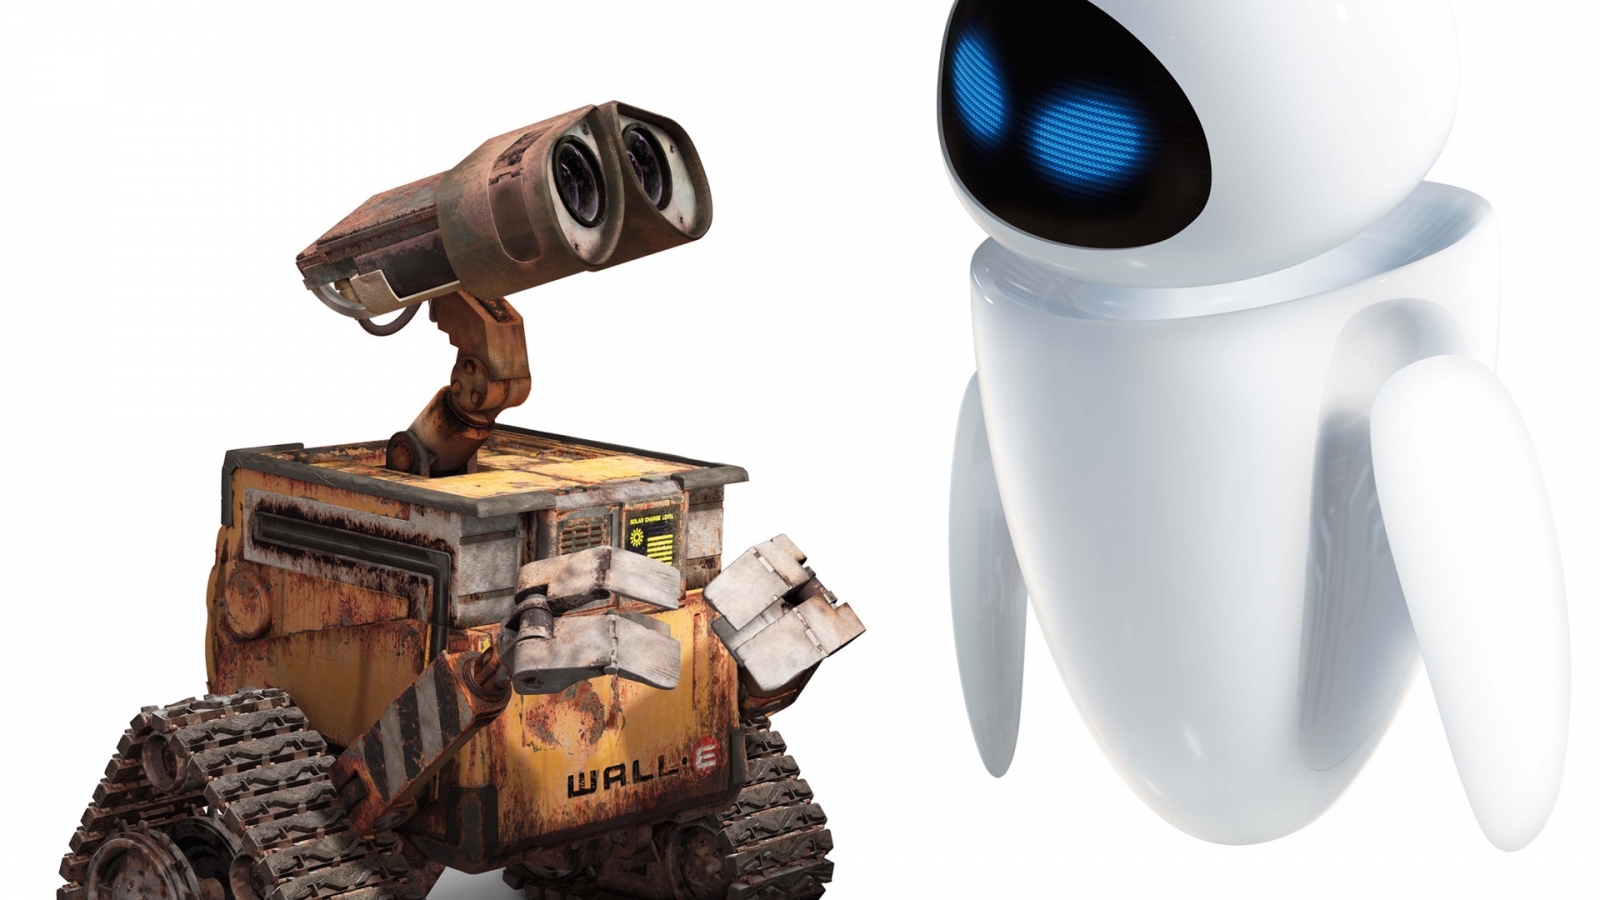 Walle Robots for 1600 x 900 HDTV resolution